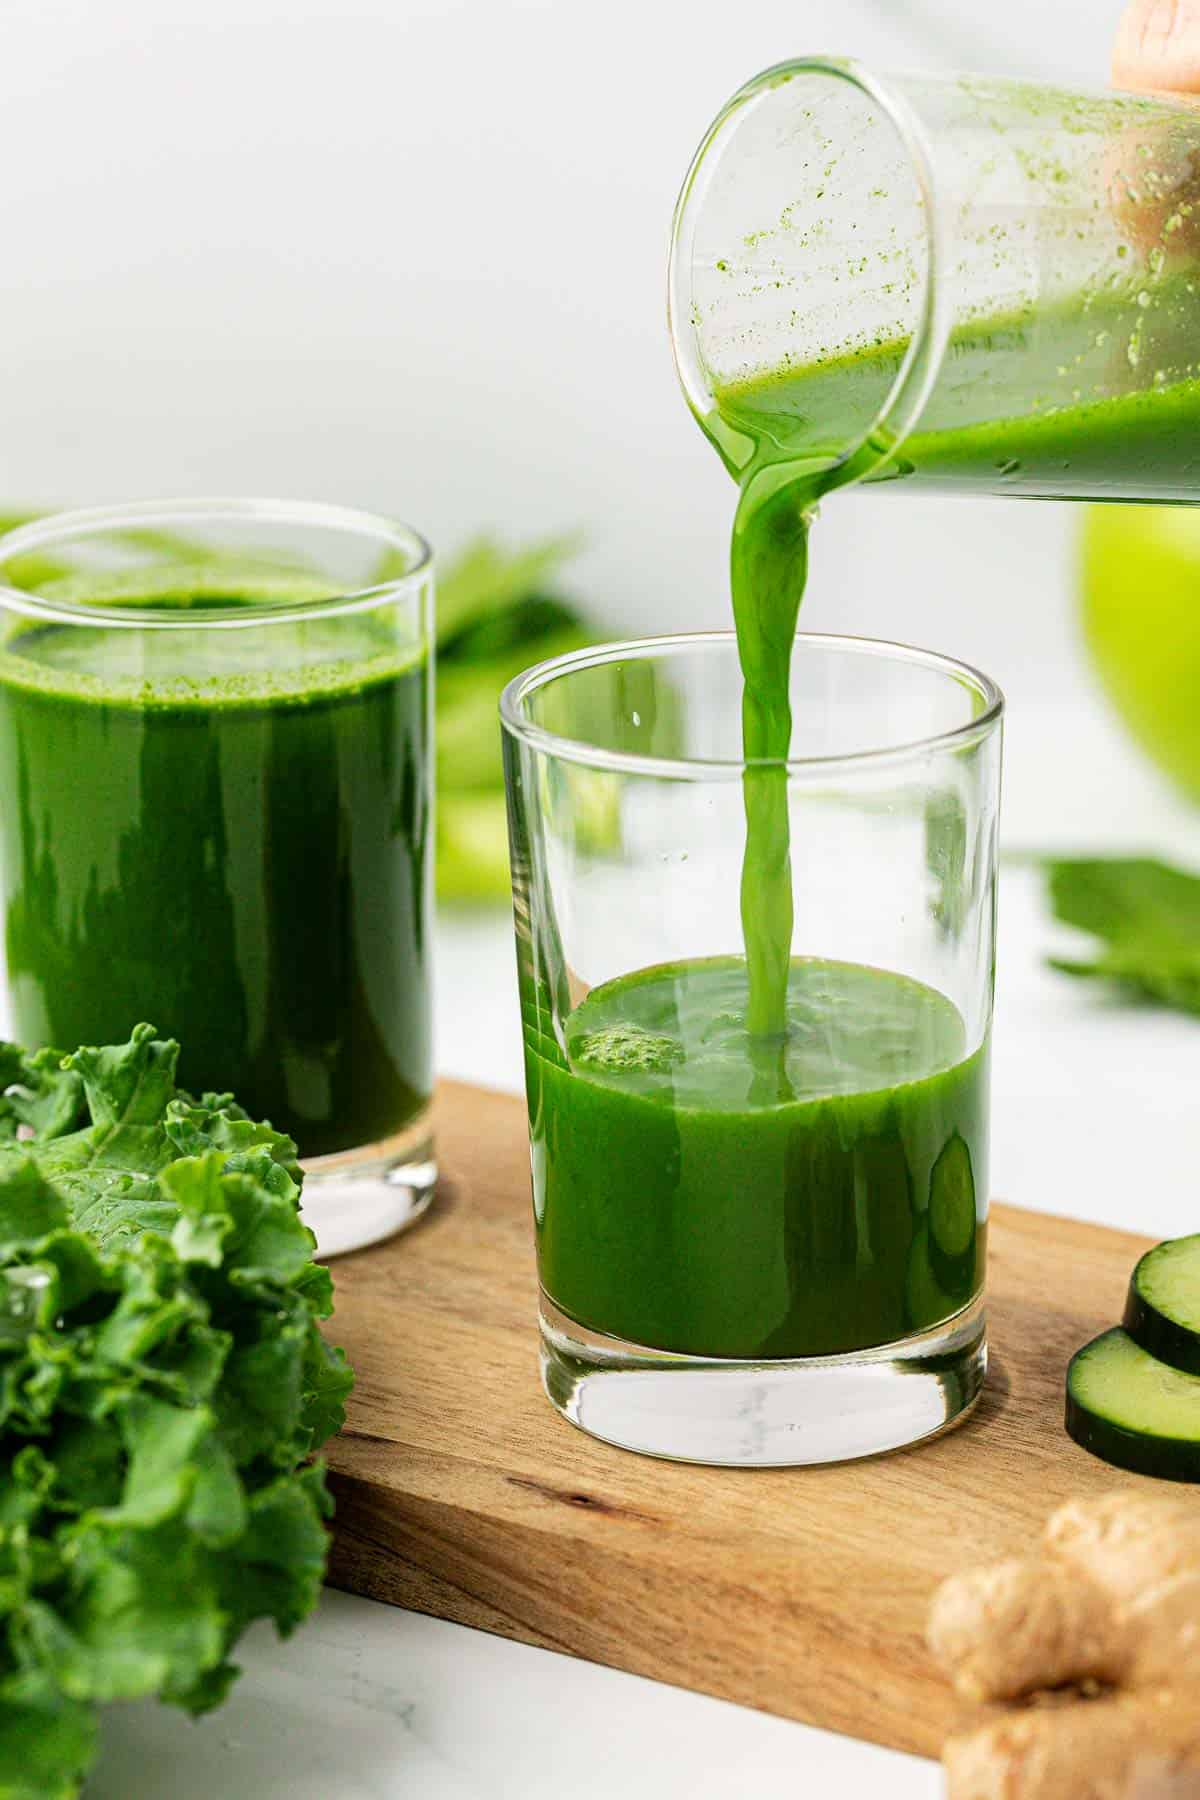 pouring green juice in a glass